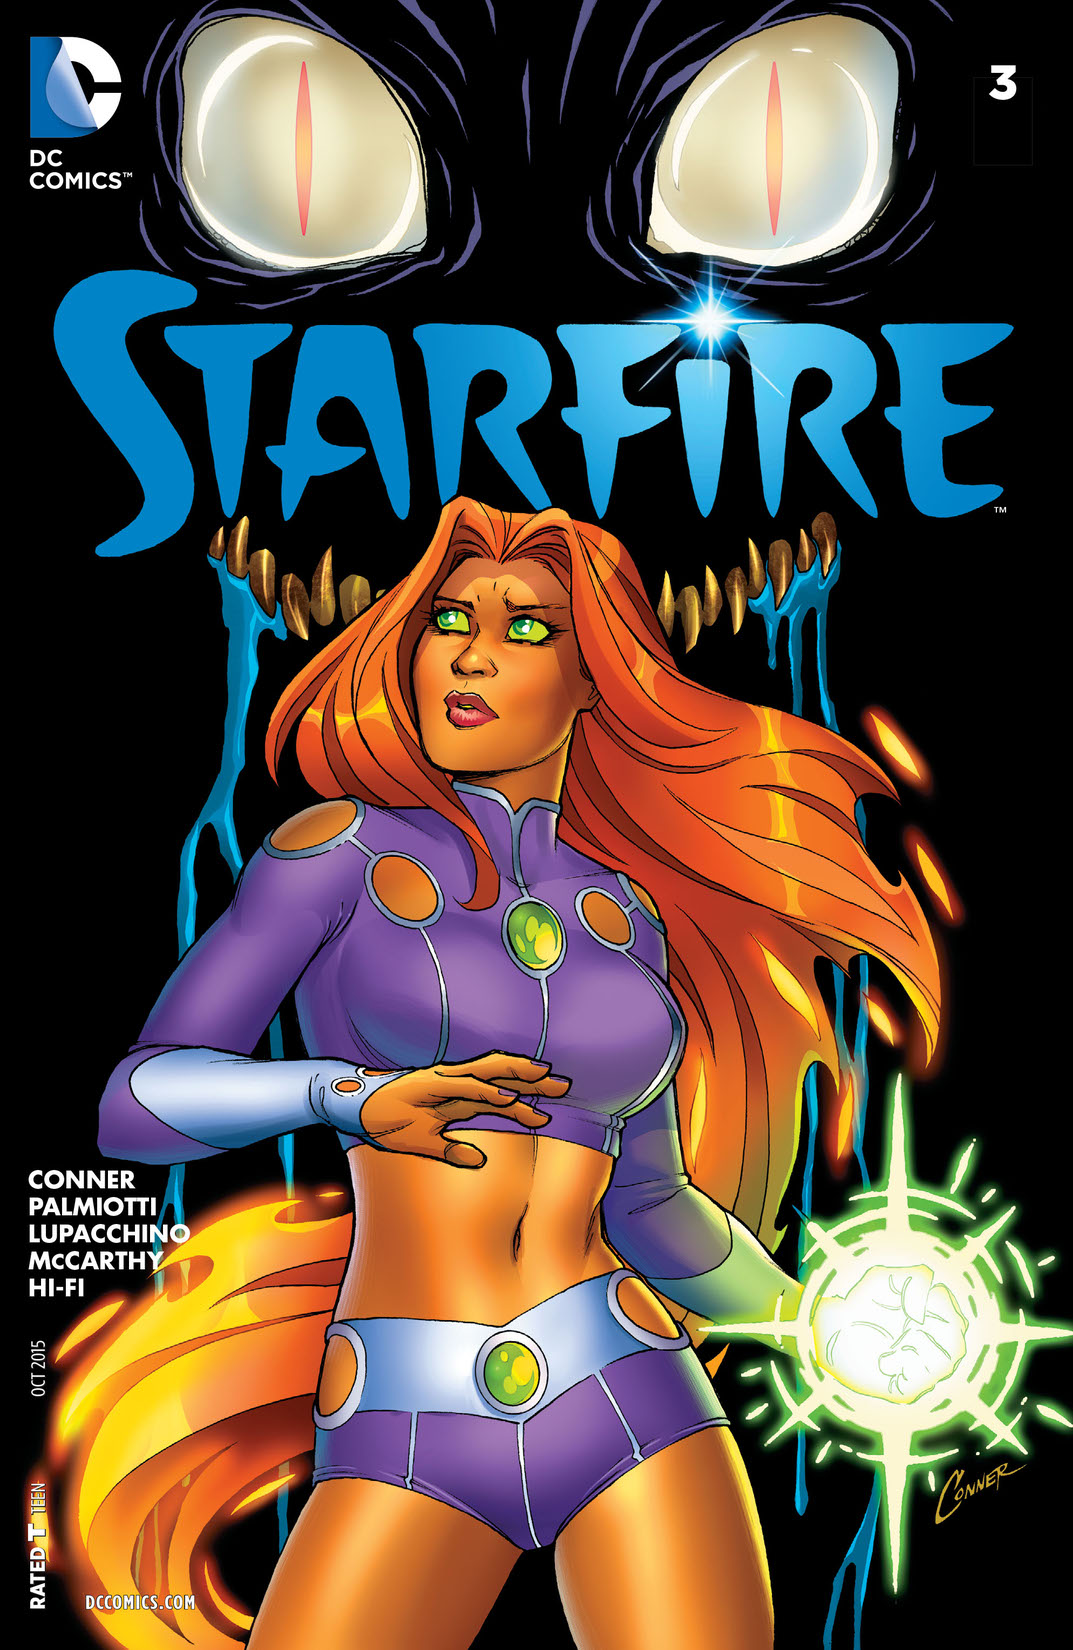 Starfire #3 preview images